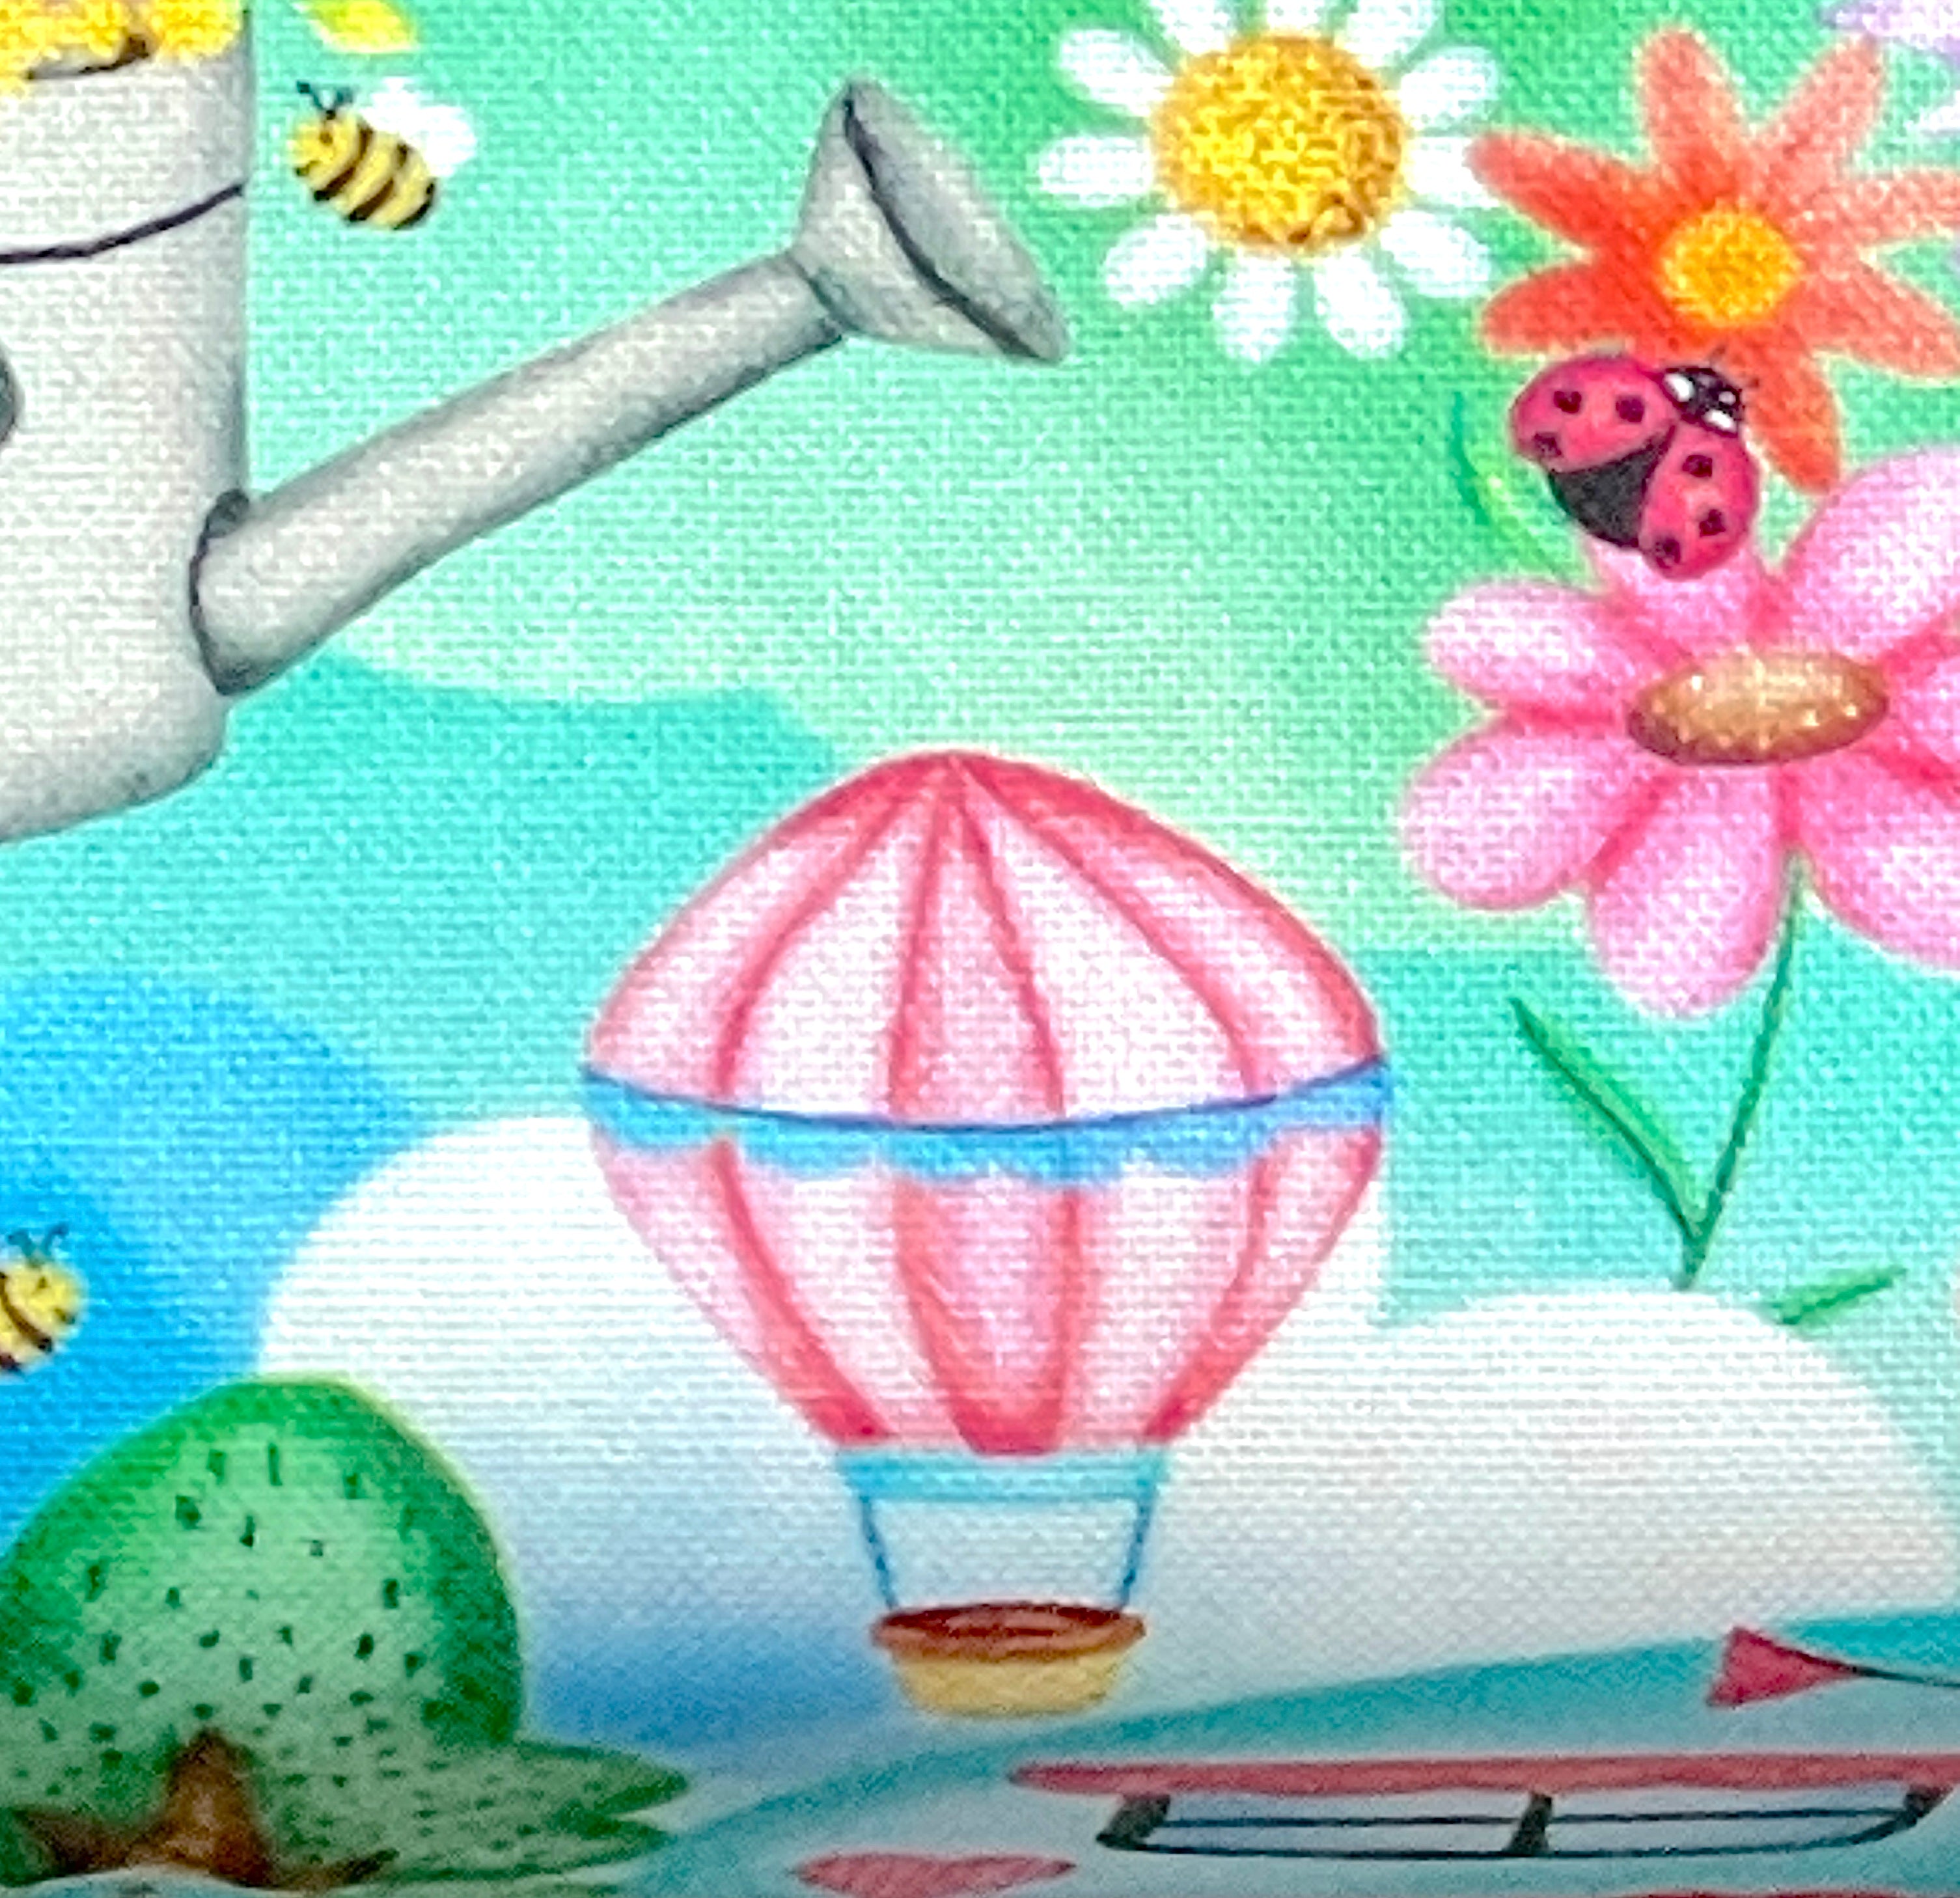 Close up of a hot air balloon, flowers, ladybug and  more.